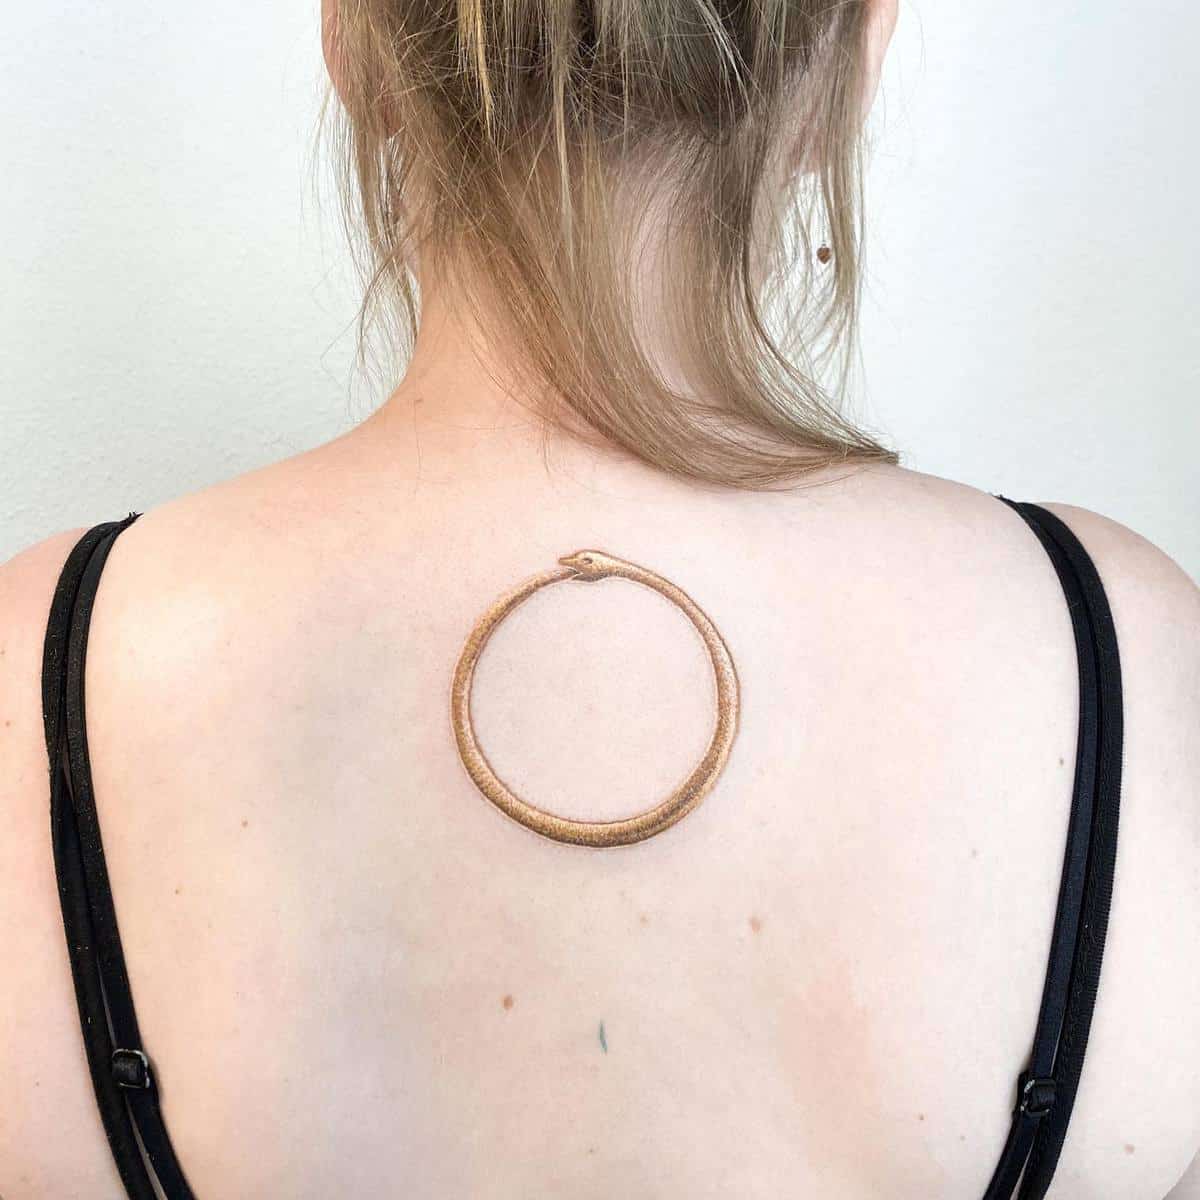 Circle Tattoo Meaning - What do different Circle Tattoo Ideas Symbolize?